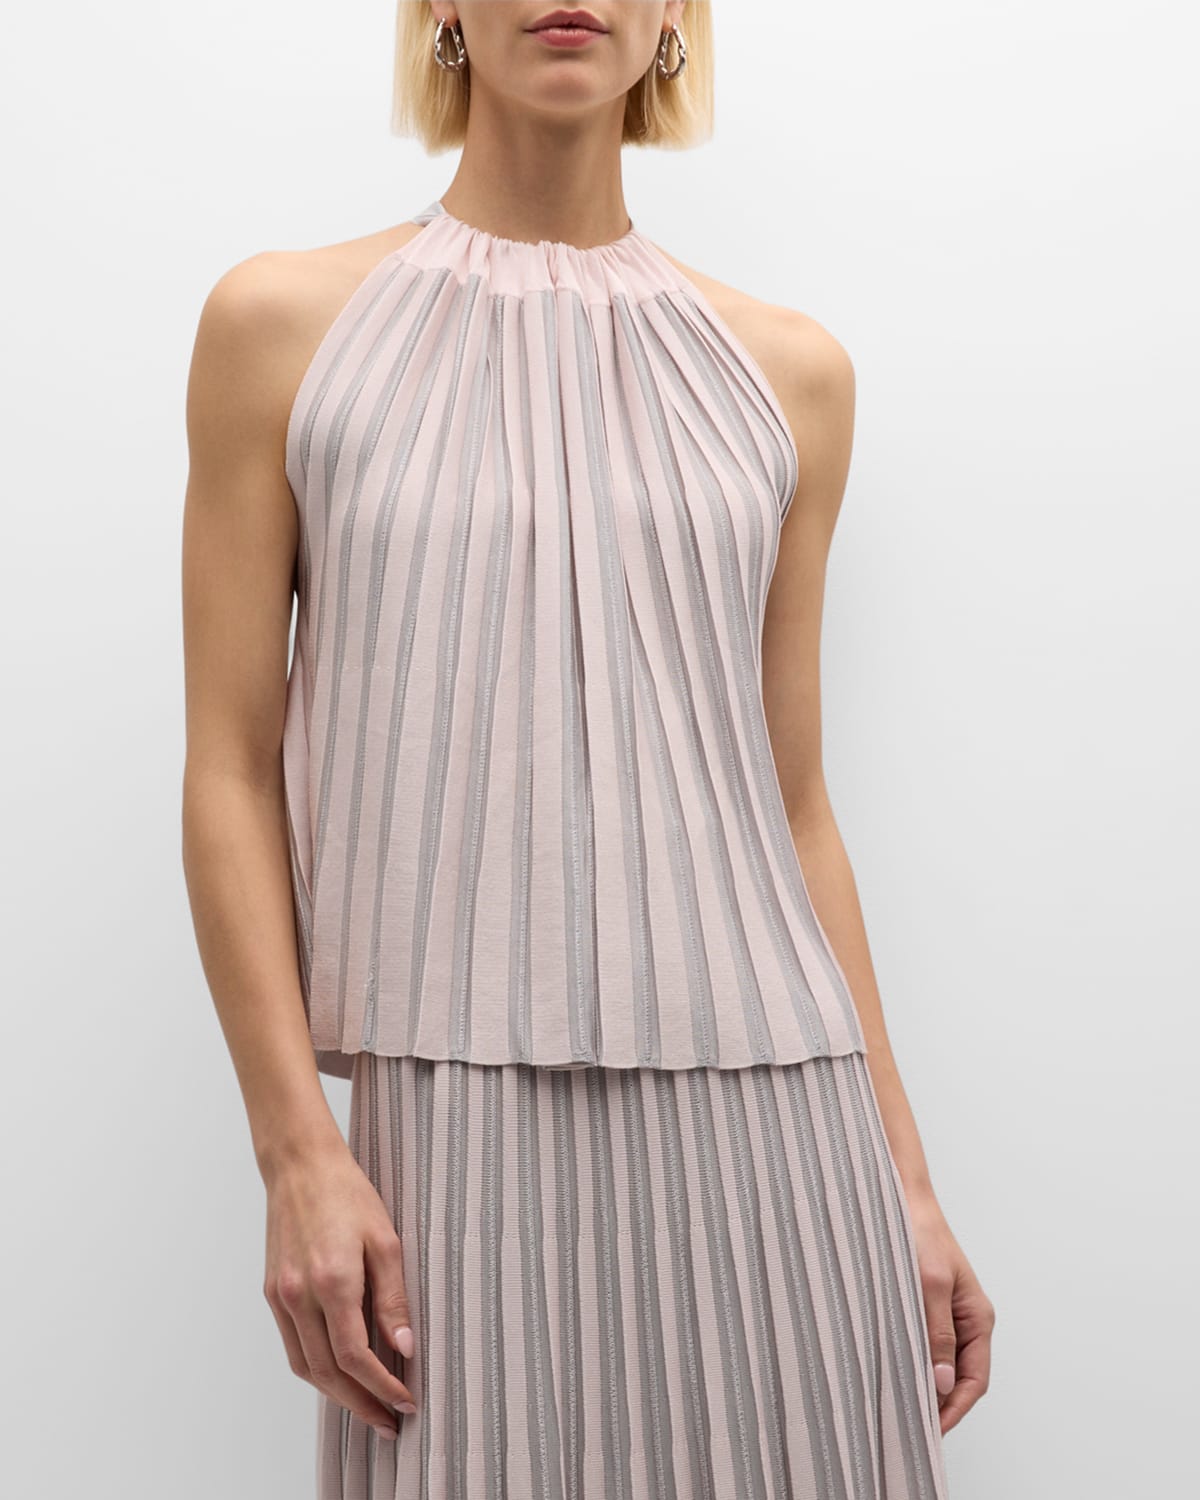 Emporio Armani Pleated Halter Top In Plaid Pink